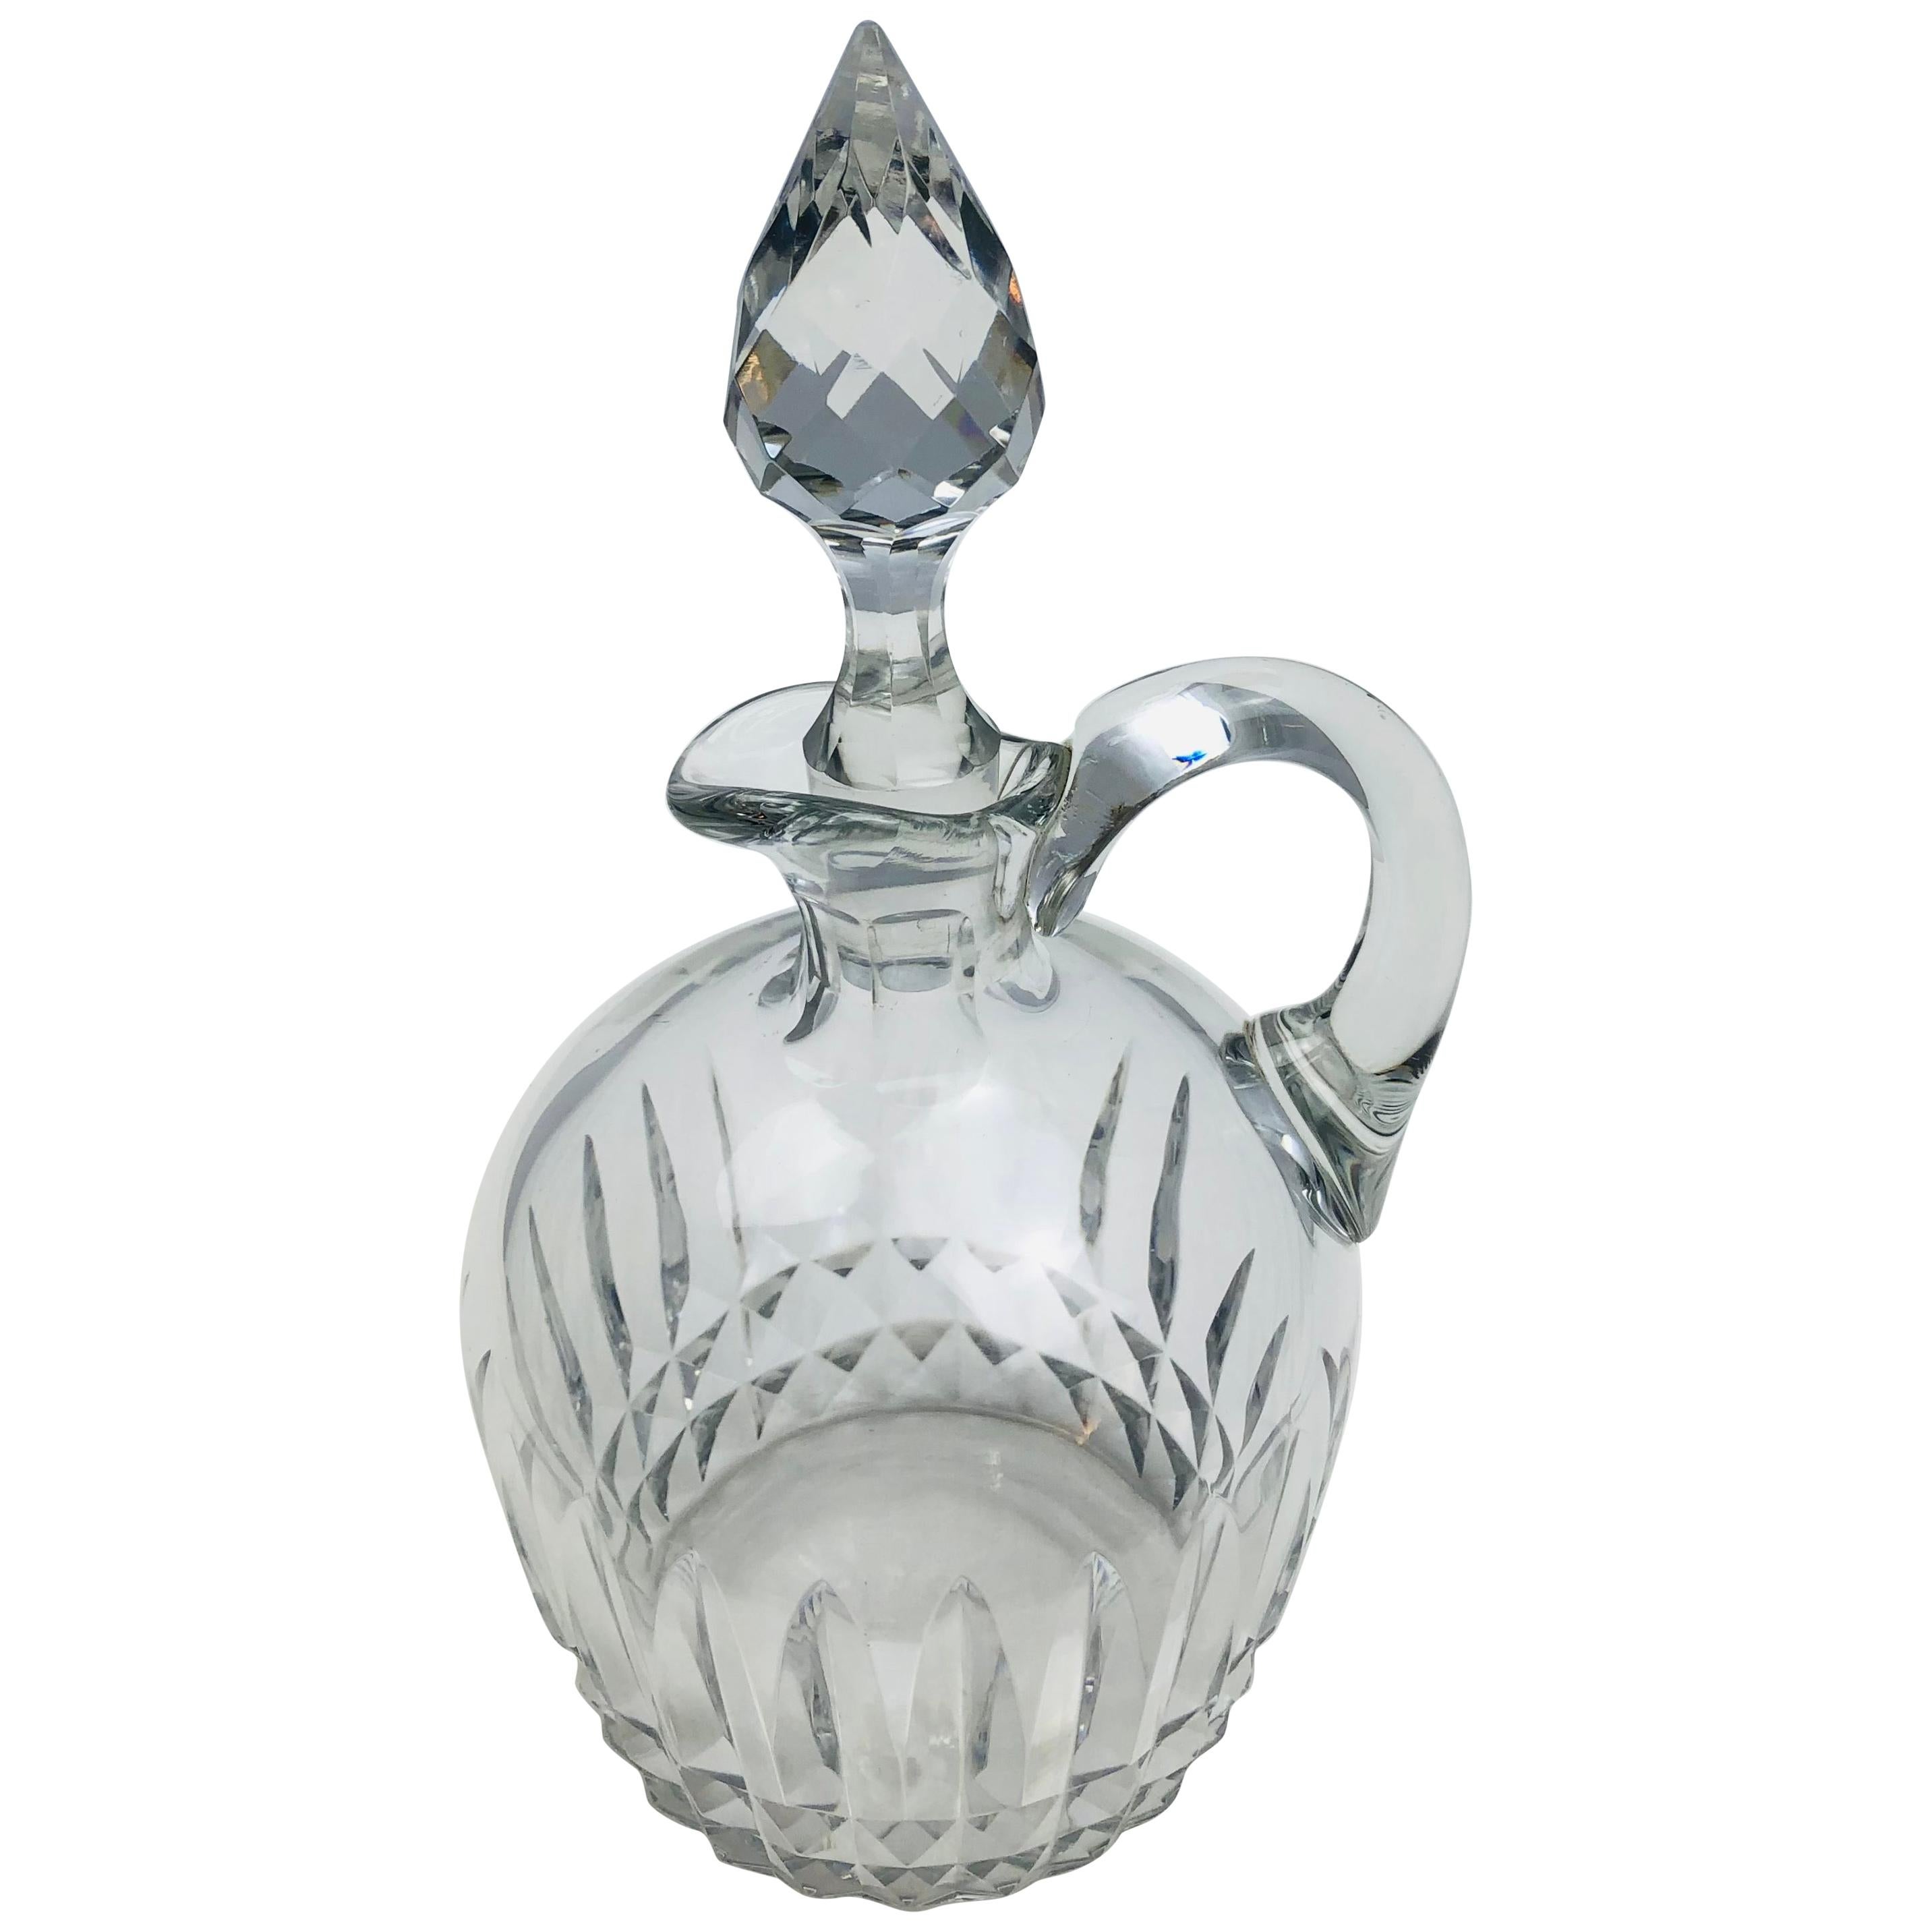 Baccarat Crystal Liquor Decanter or Carafe, Mid-20th Century